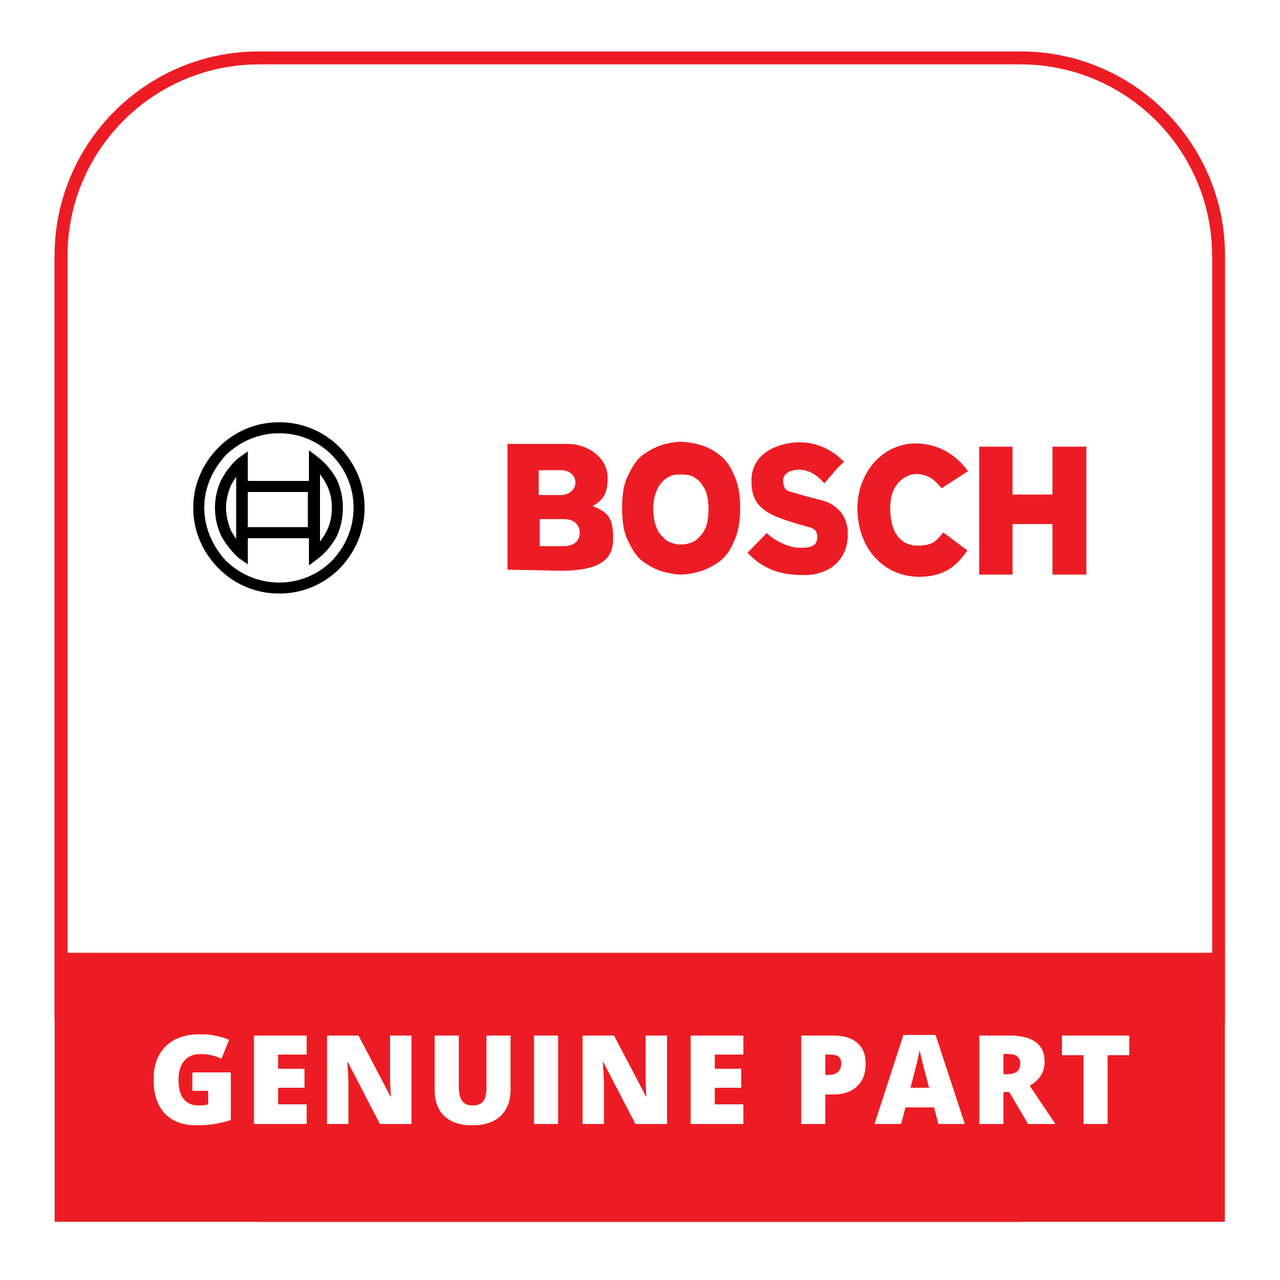 Bosch (Thermador) 20001076 - Housing Part - Genuine Bosch (Thermador) Part